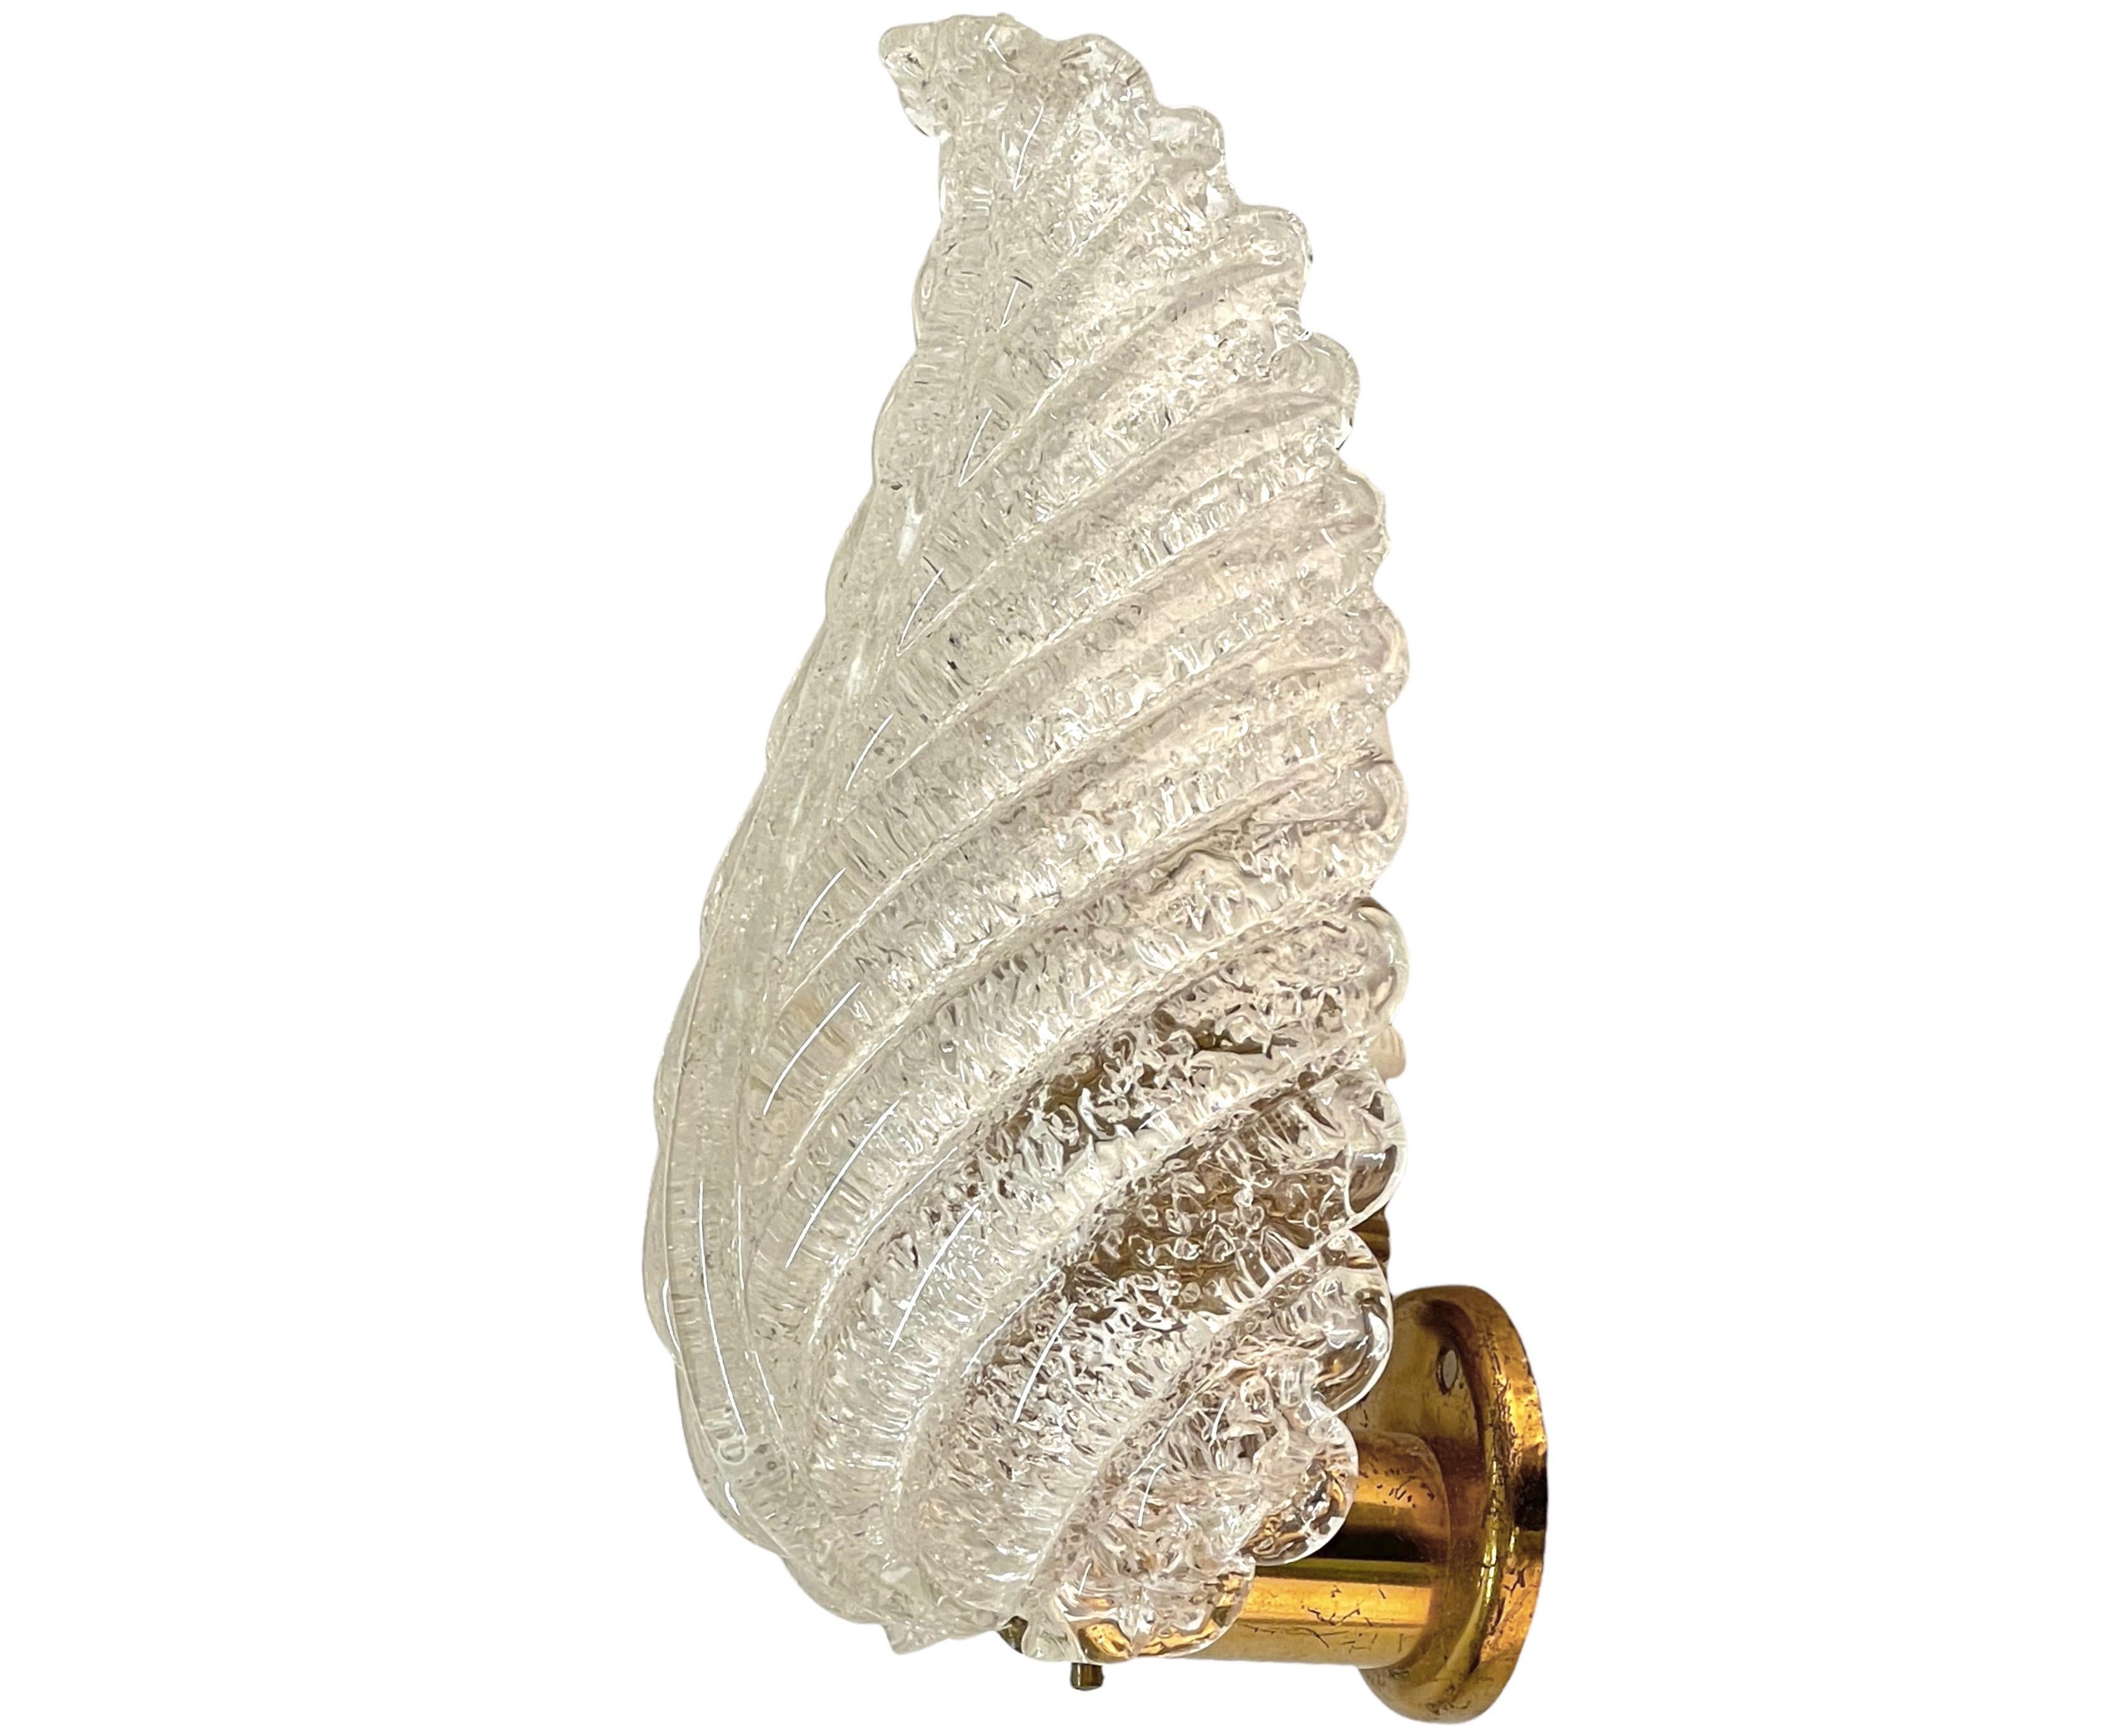 Incredible midcentury Murano crystal glass leaf wall sconce with brass structure. This wonderful piece was designed in Italy after Barovier & Toso during the 1950s.

The sconce is outstanding as the way the leaf is designed in detail on the edges